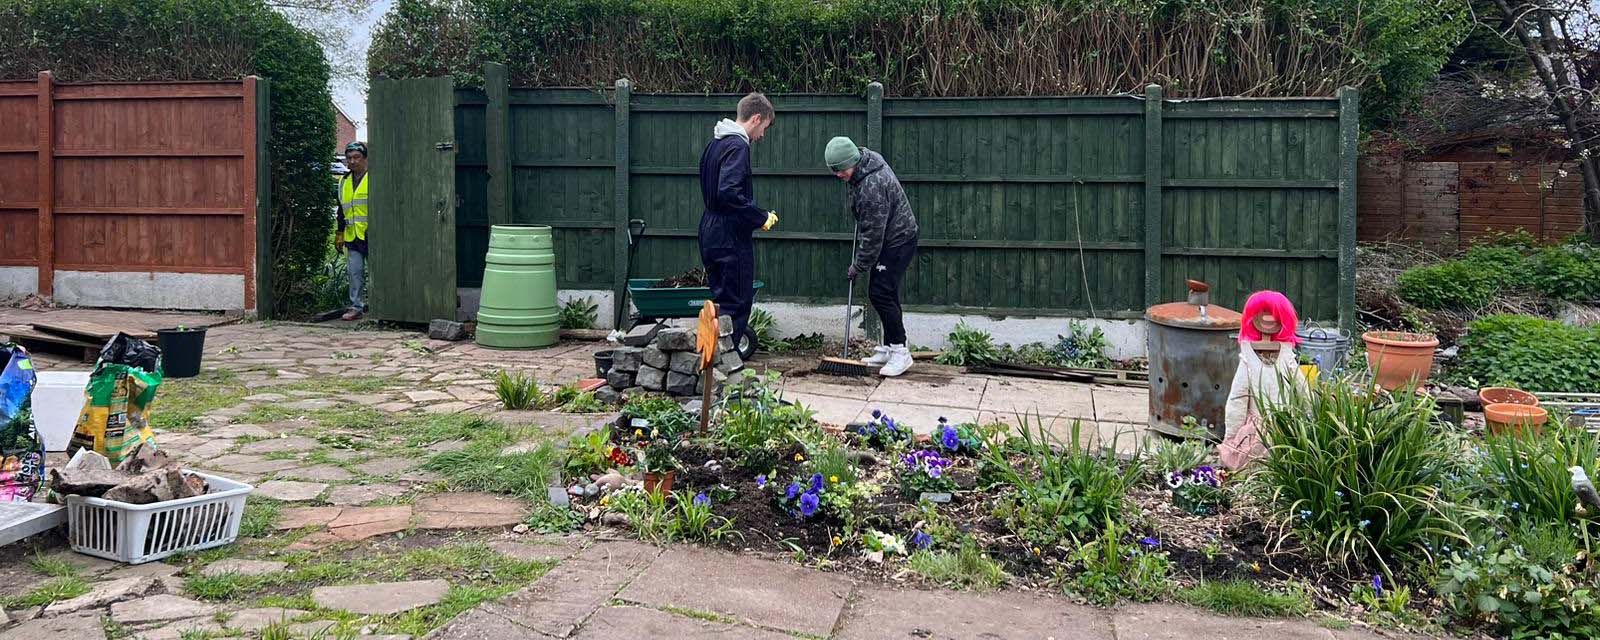 Students at work in Daffodils Community Garden